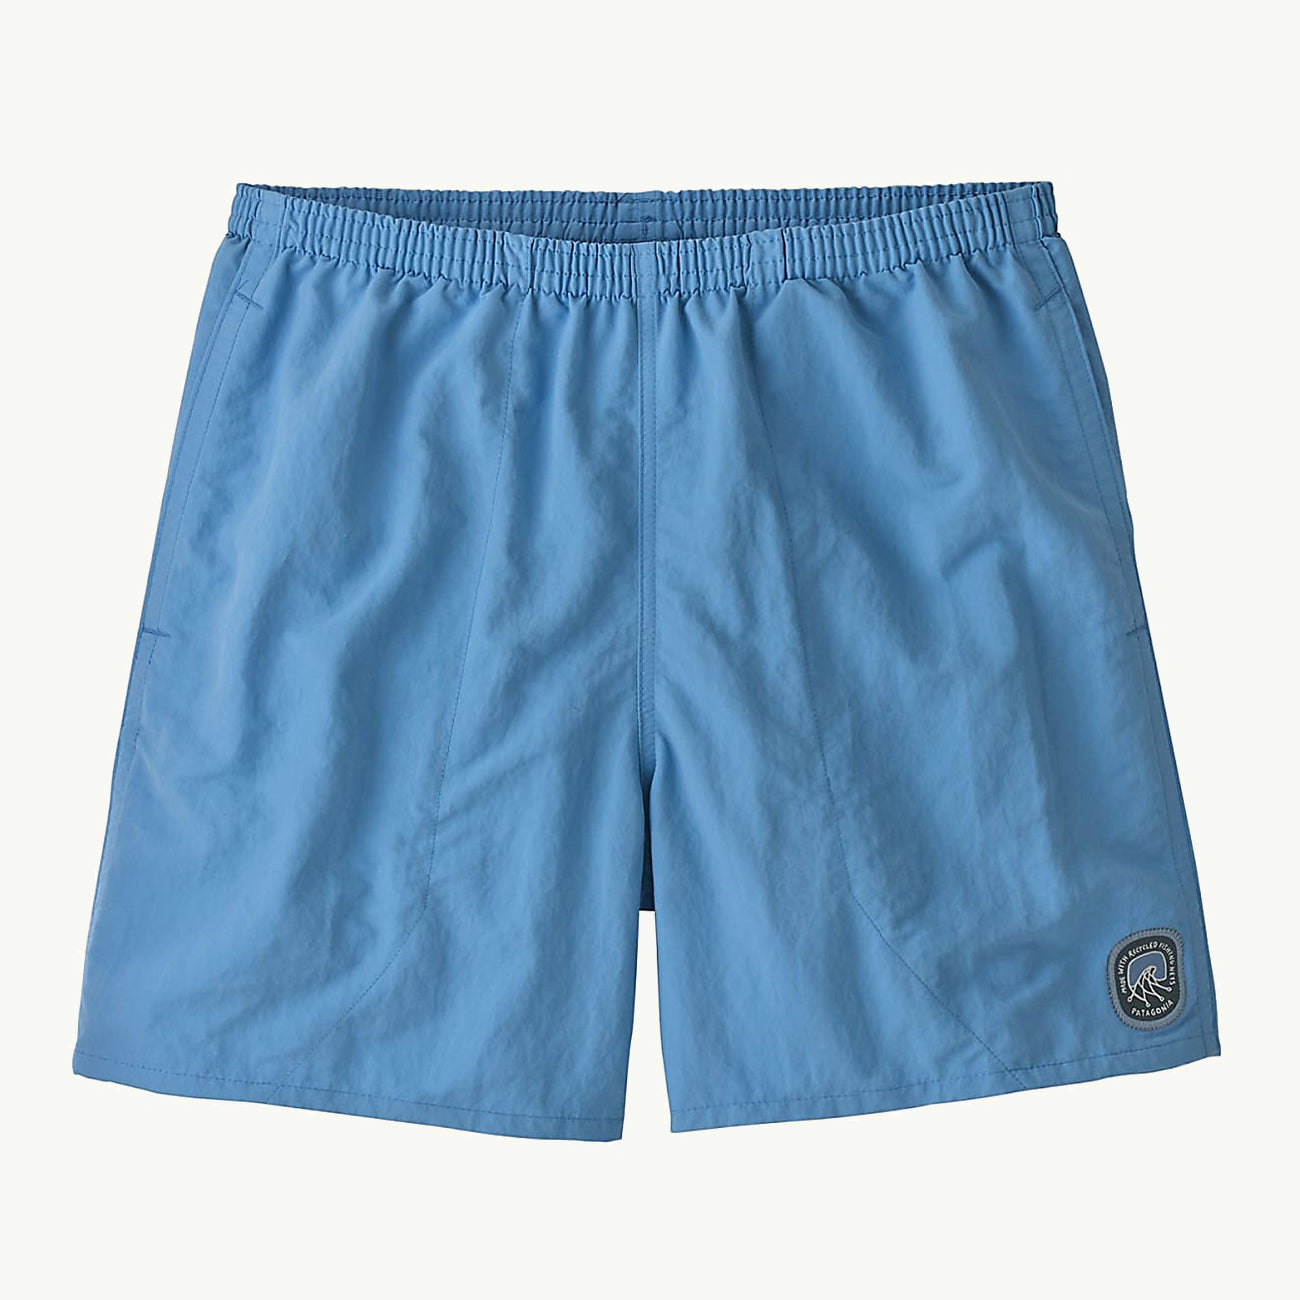 Baggies Shorts 5" - Clean Currents Patch/Lago Blue